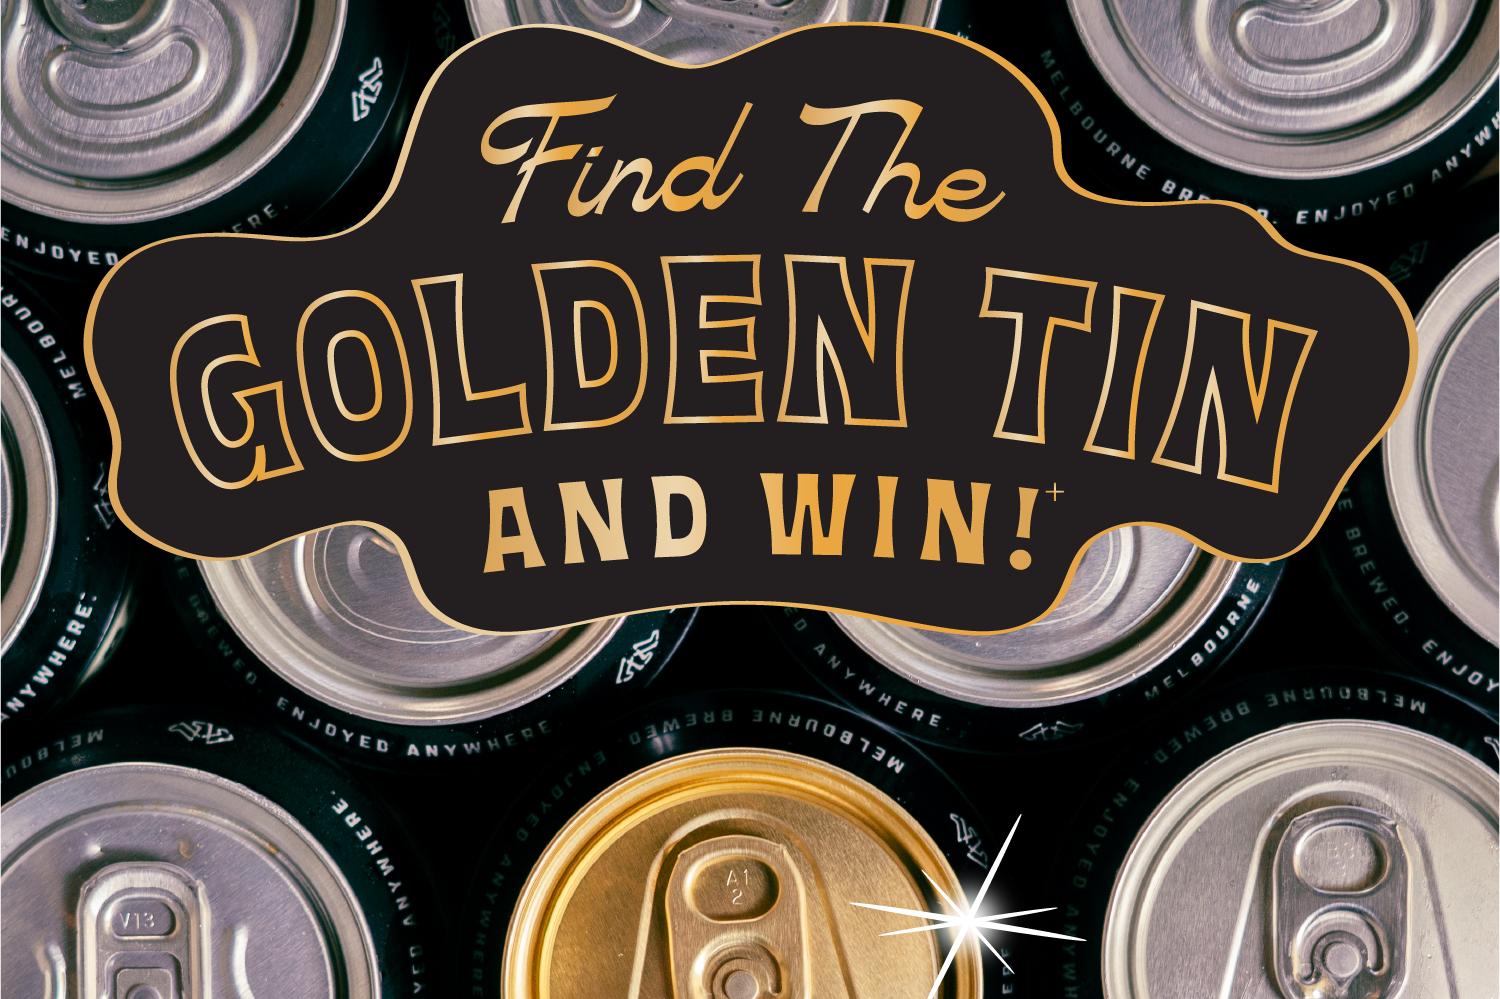 Join the hunt for the golden tin!